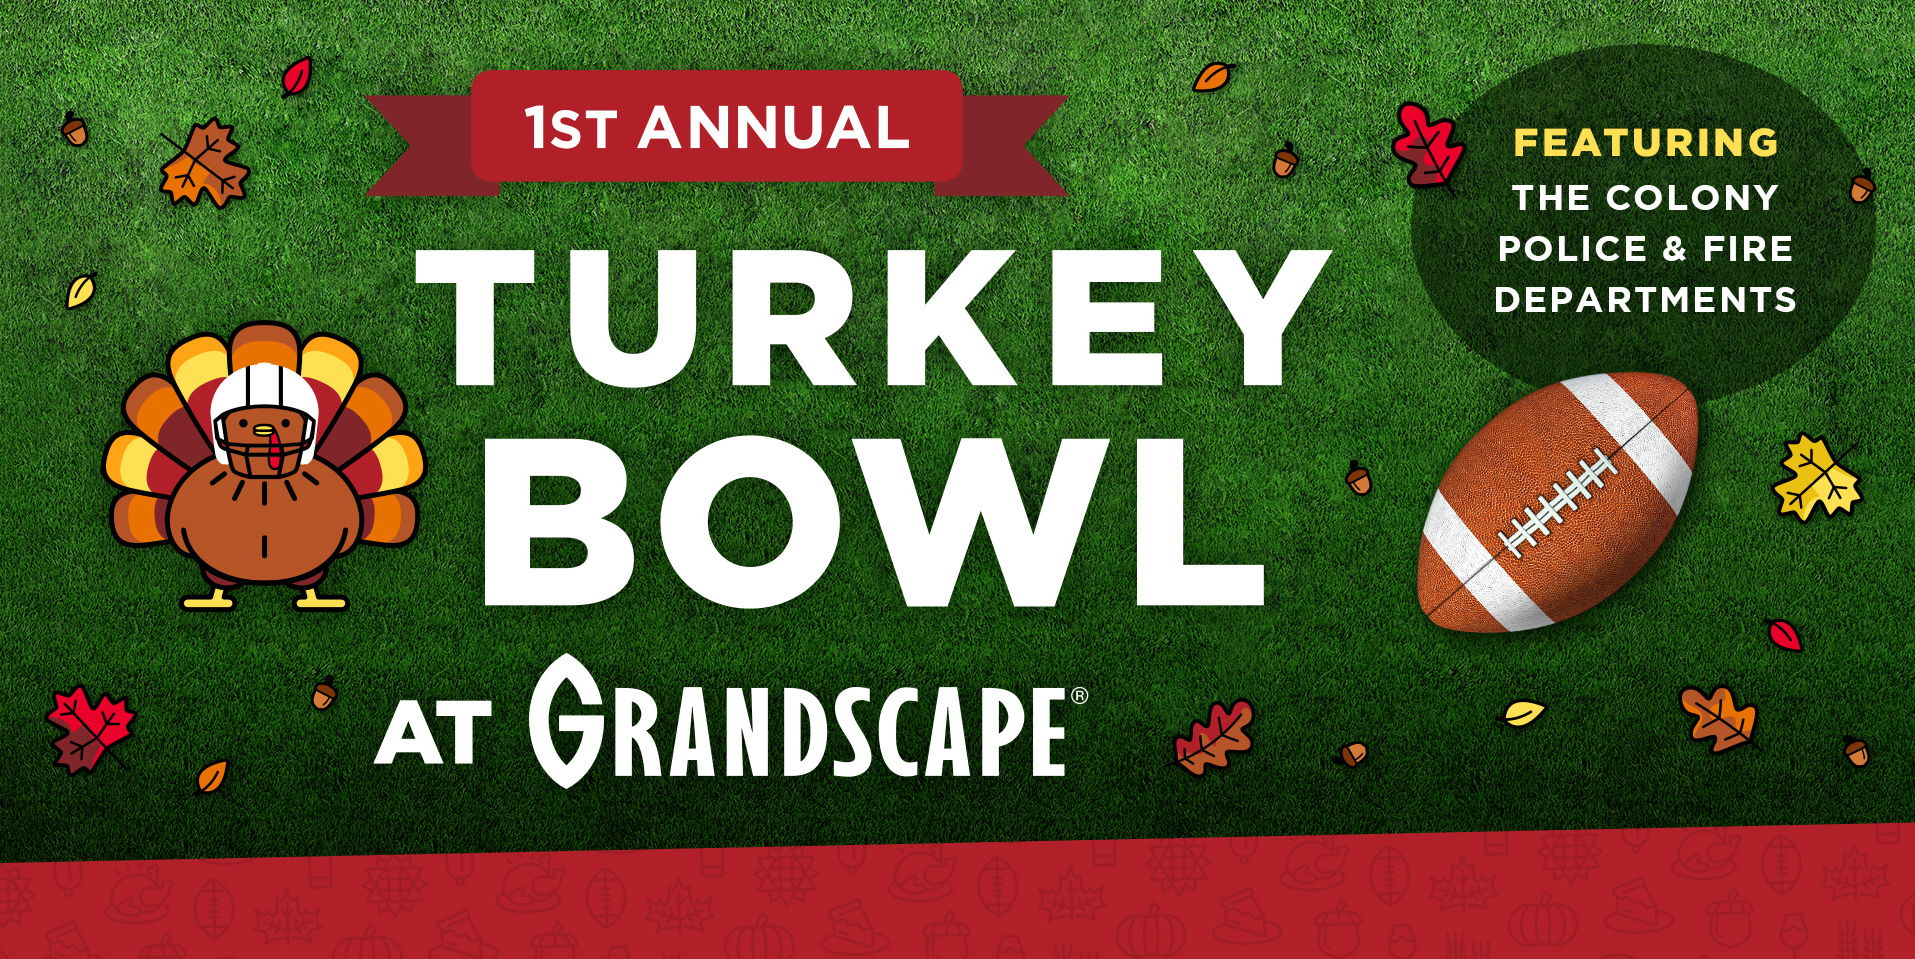 1st Annual Turkey Bowl promotional image